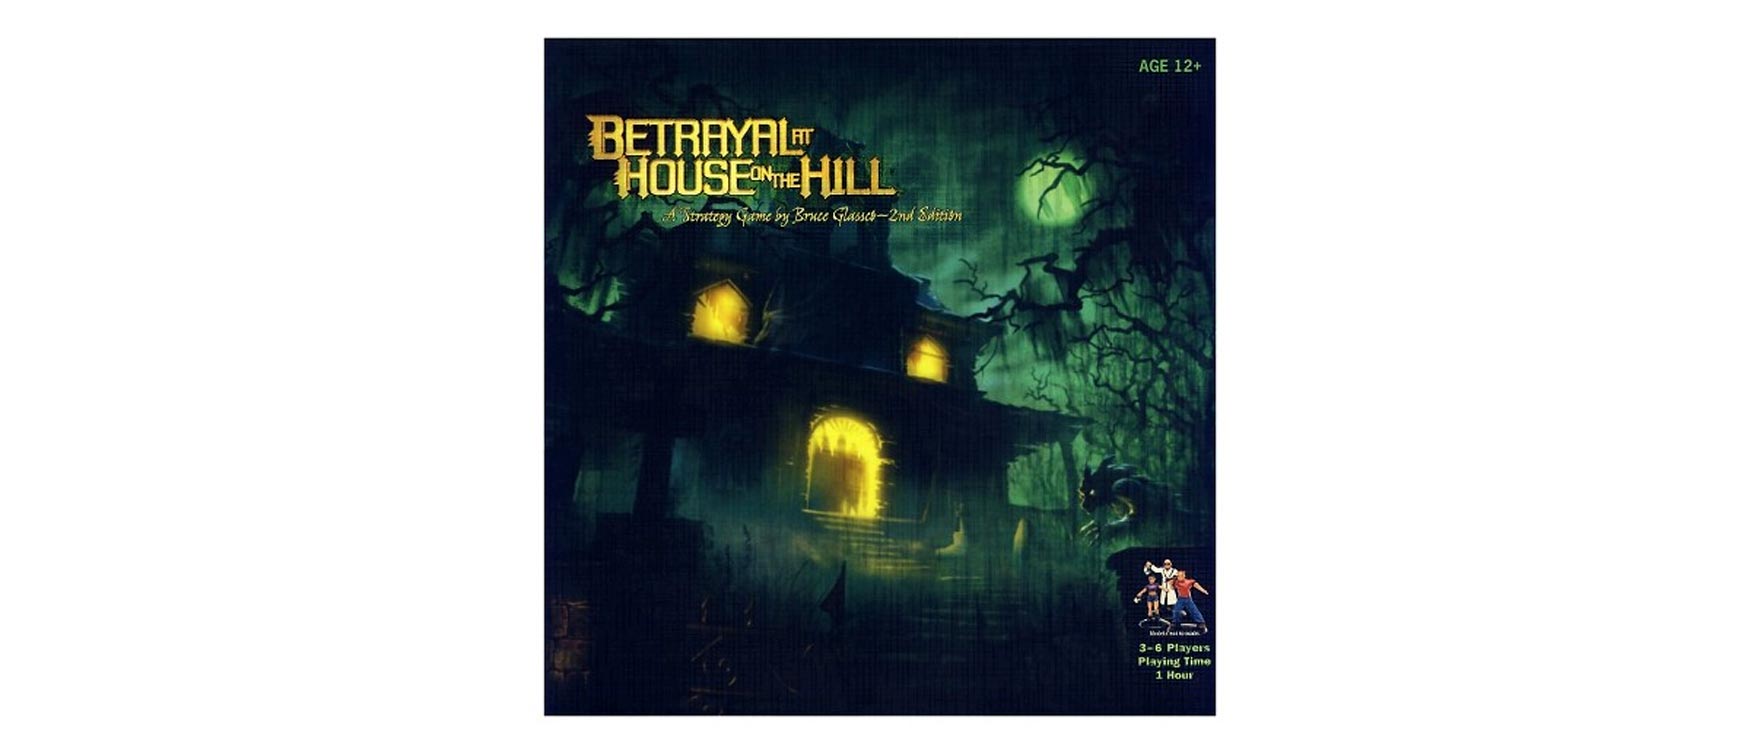 1. Betrayal at House on the Hill